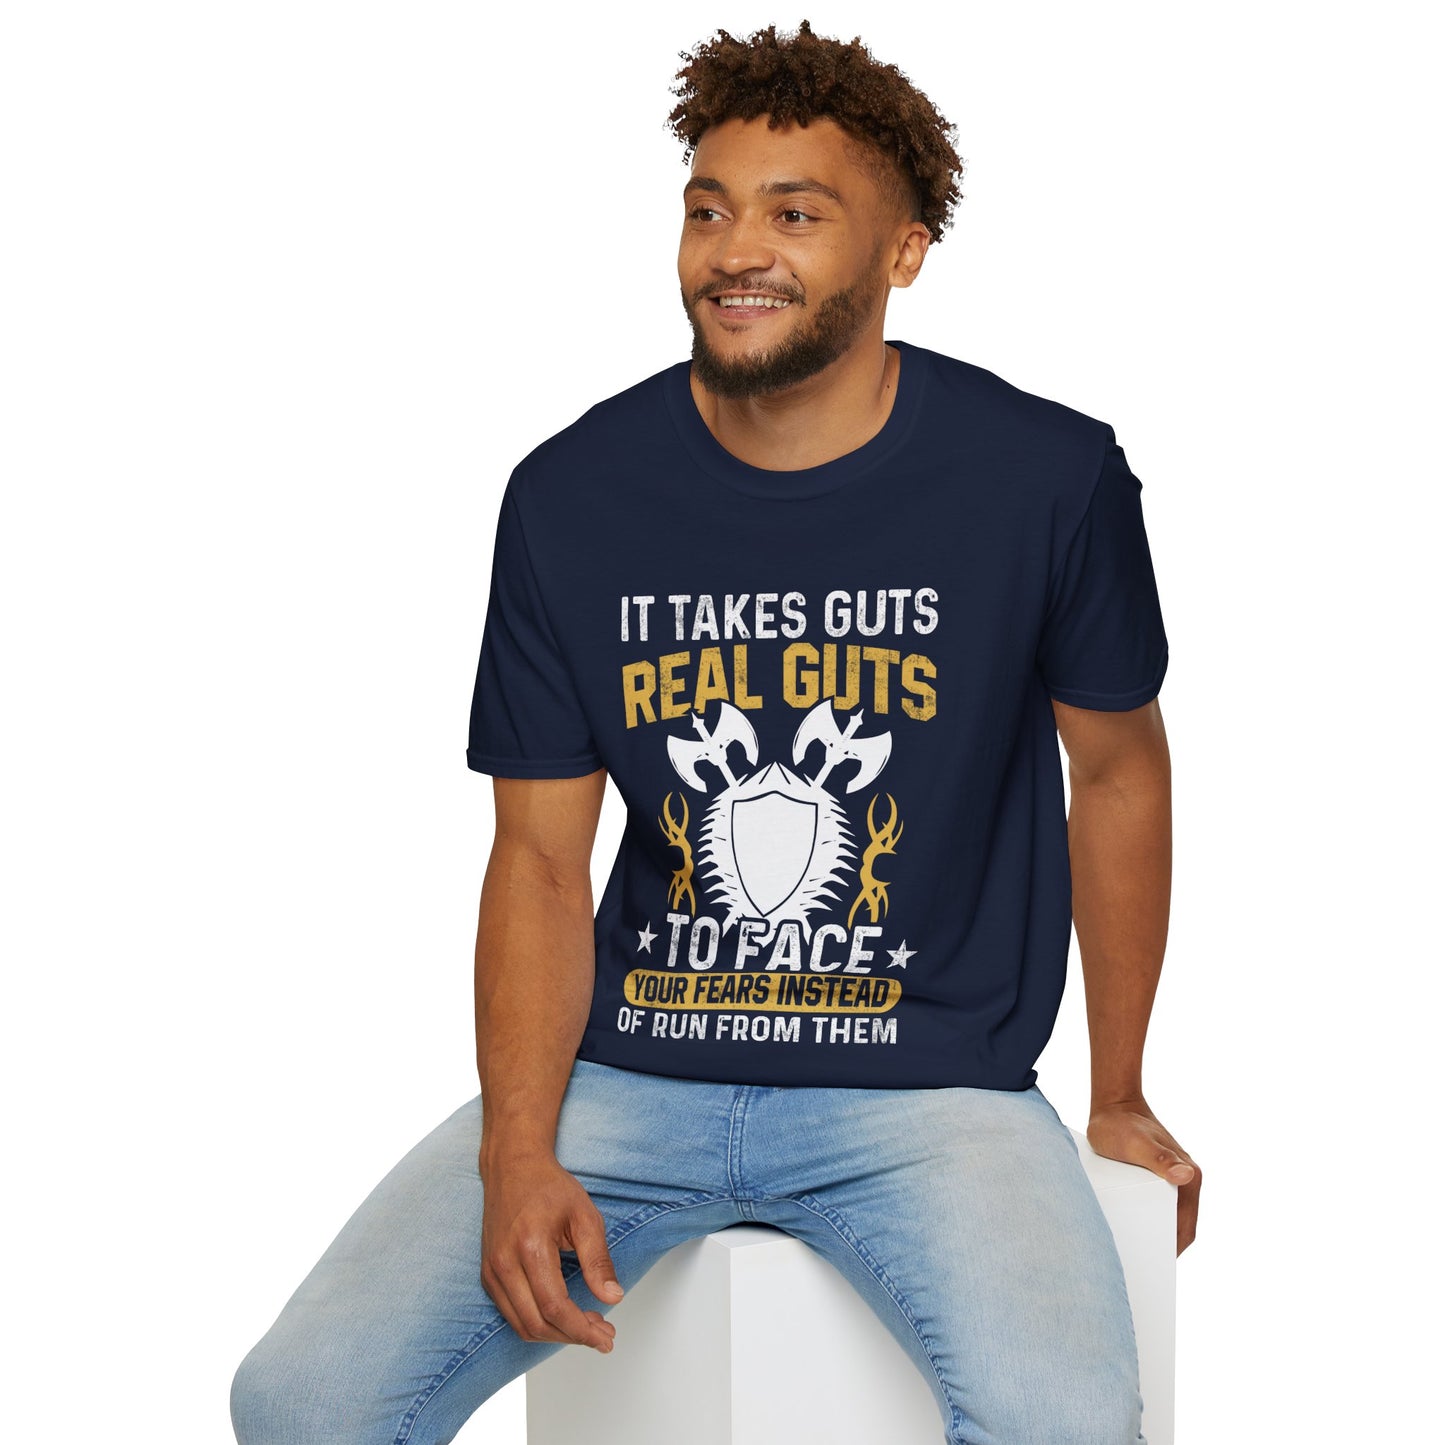 It Takes Guts Real Guts To Face Your Fears Instead Of Run From Them T-Shirt